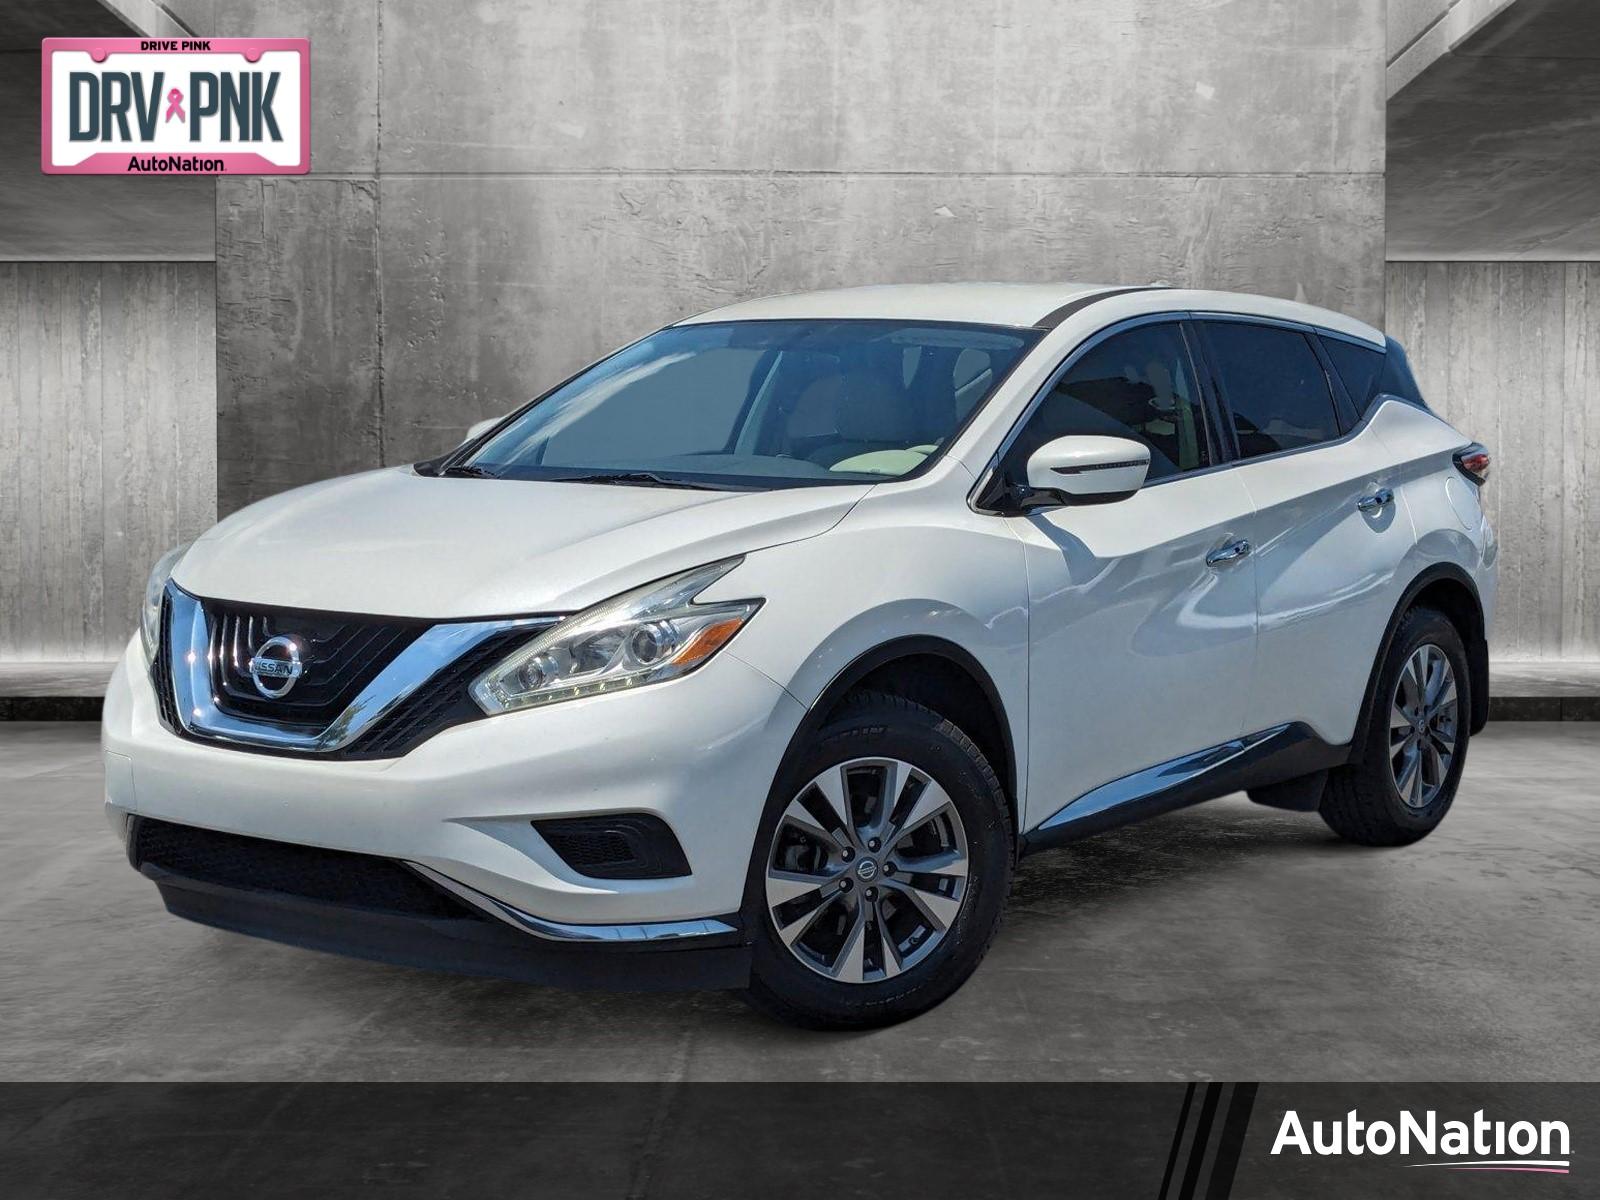 2017 Nissan Murano Vehicle Photo in Clearwater, FL 33761